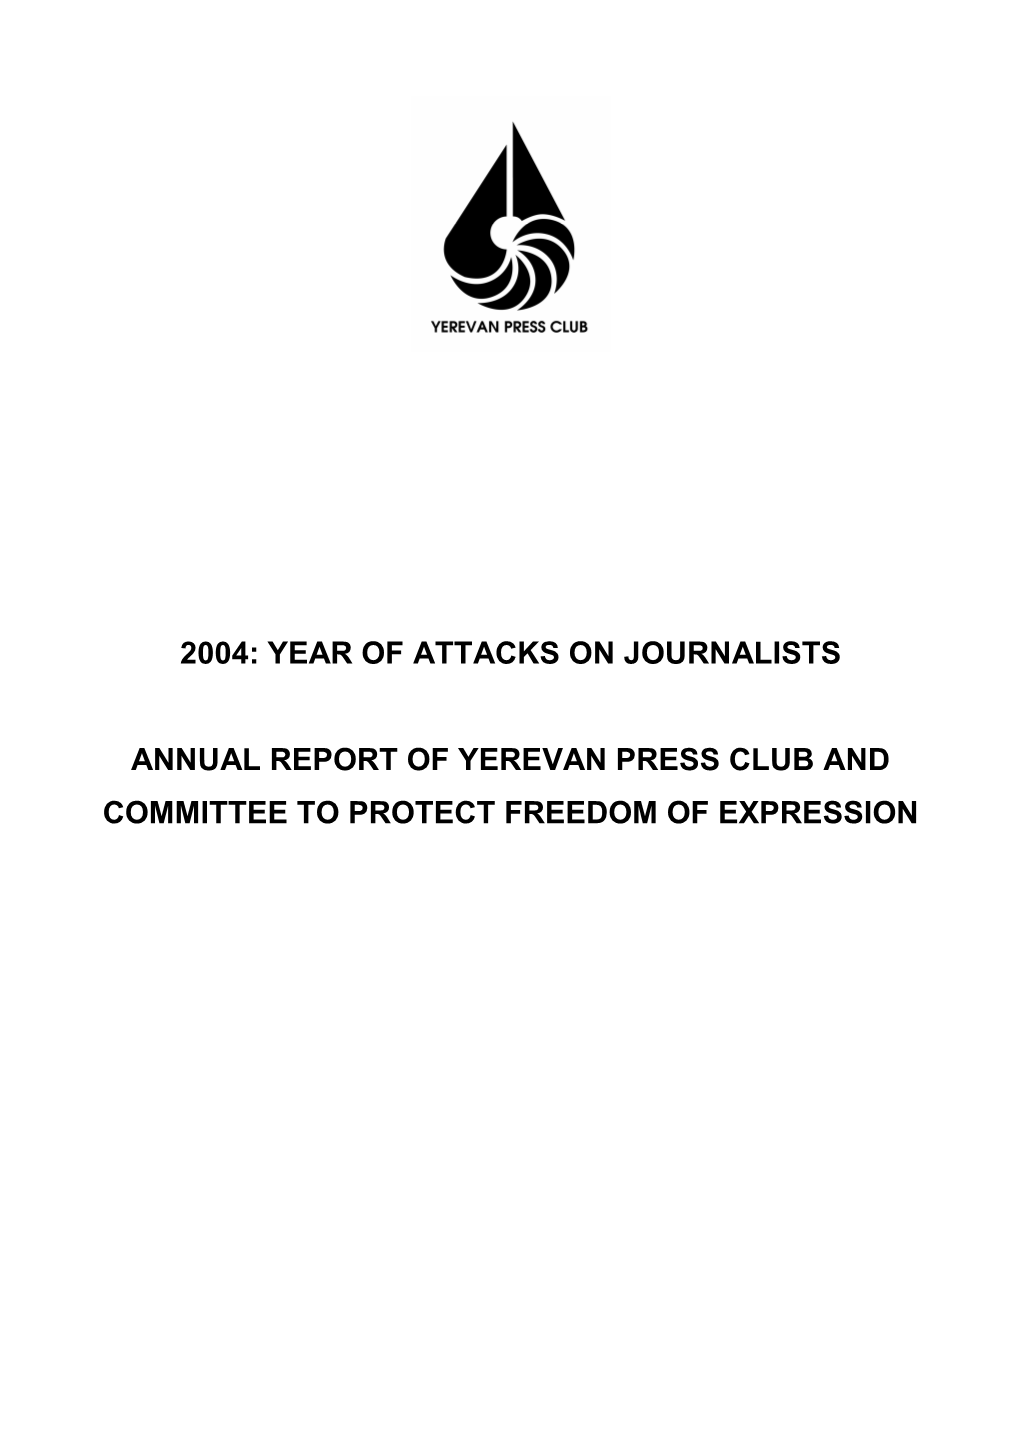 2004: Year of Attacks on Journalists Annual Report of Yerevan Press Club and Committee to Protect Freedom of Expression